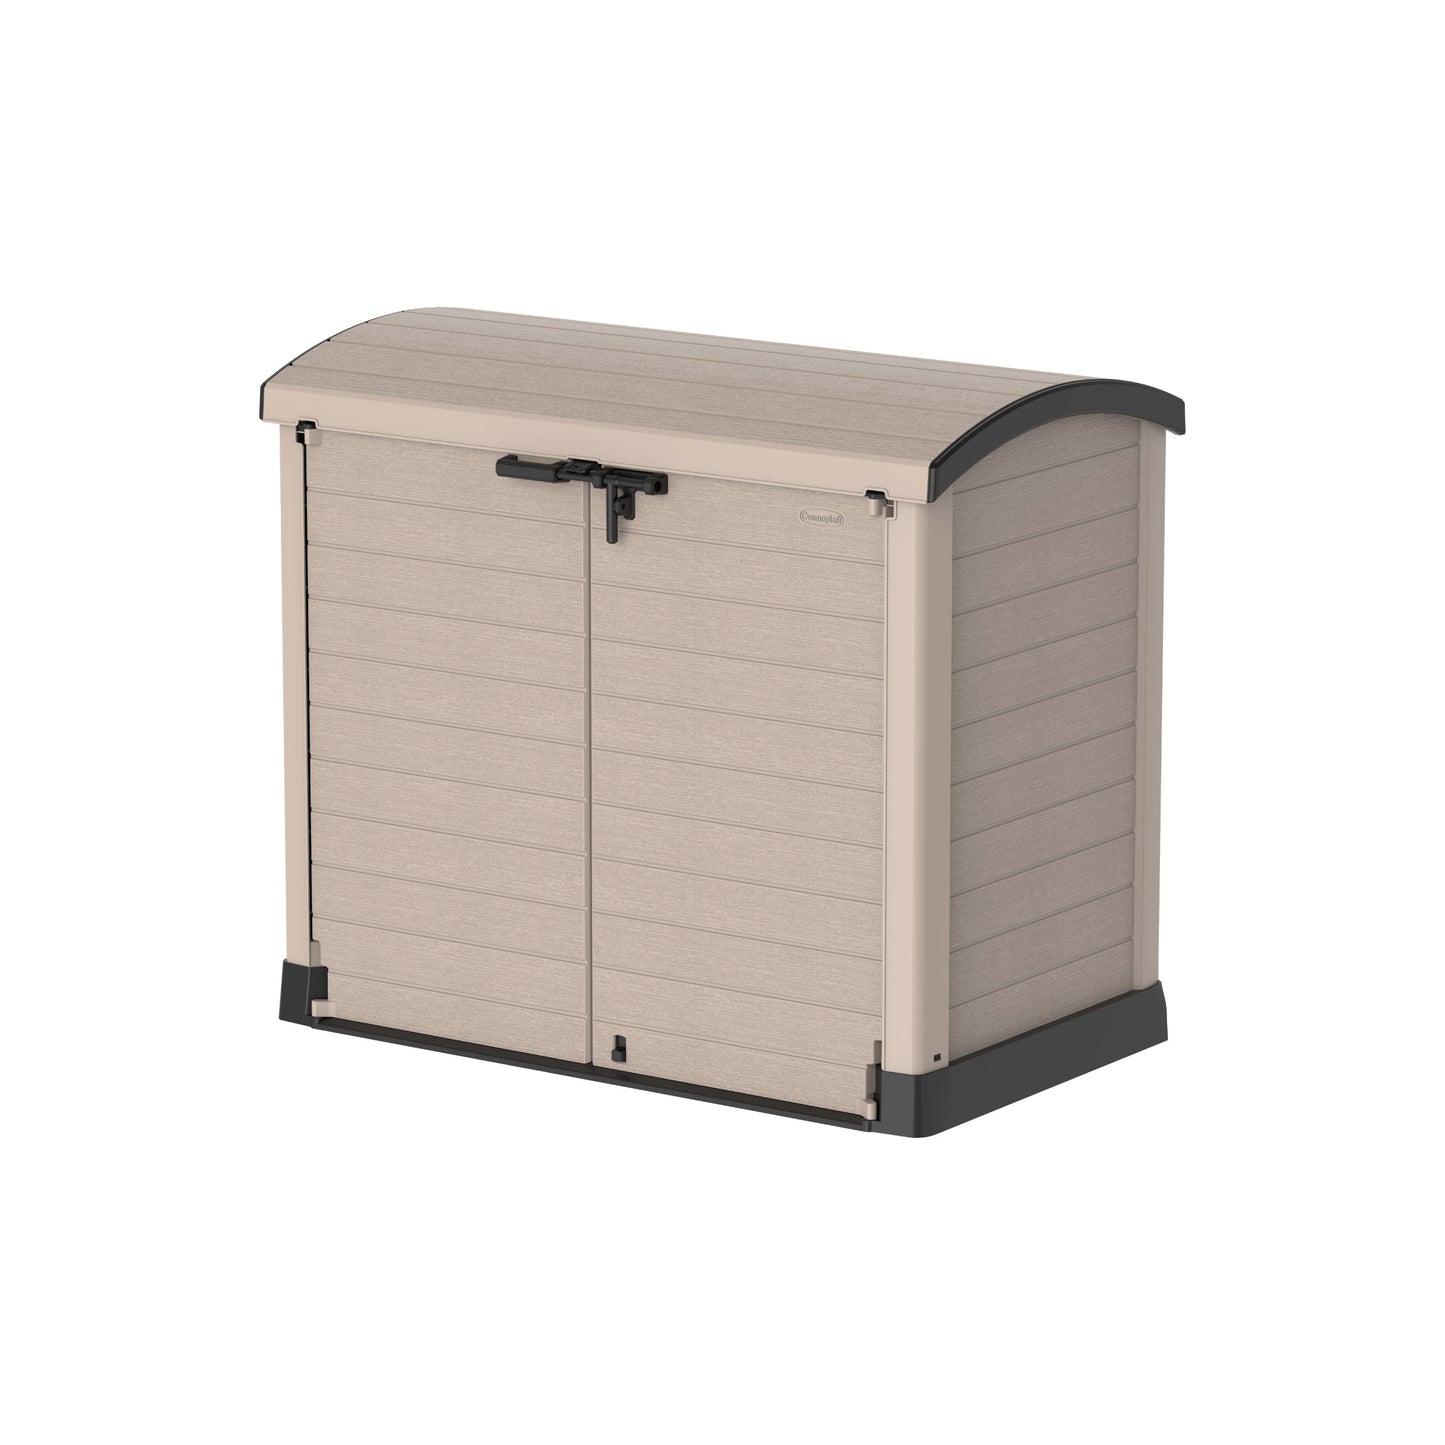 Cedargrain 1200L Small Storage Shed with Arc Lid - Cosmoplast Bahrain